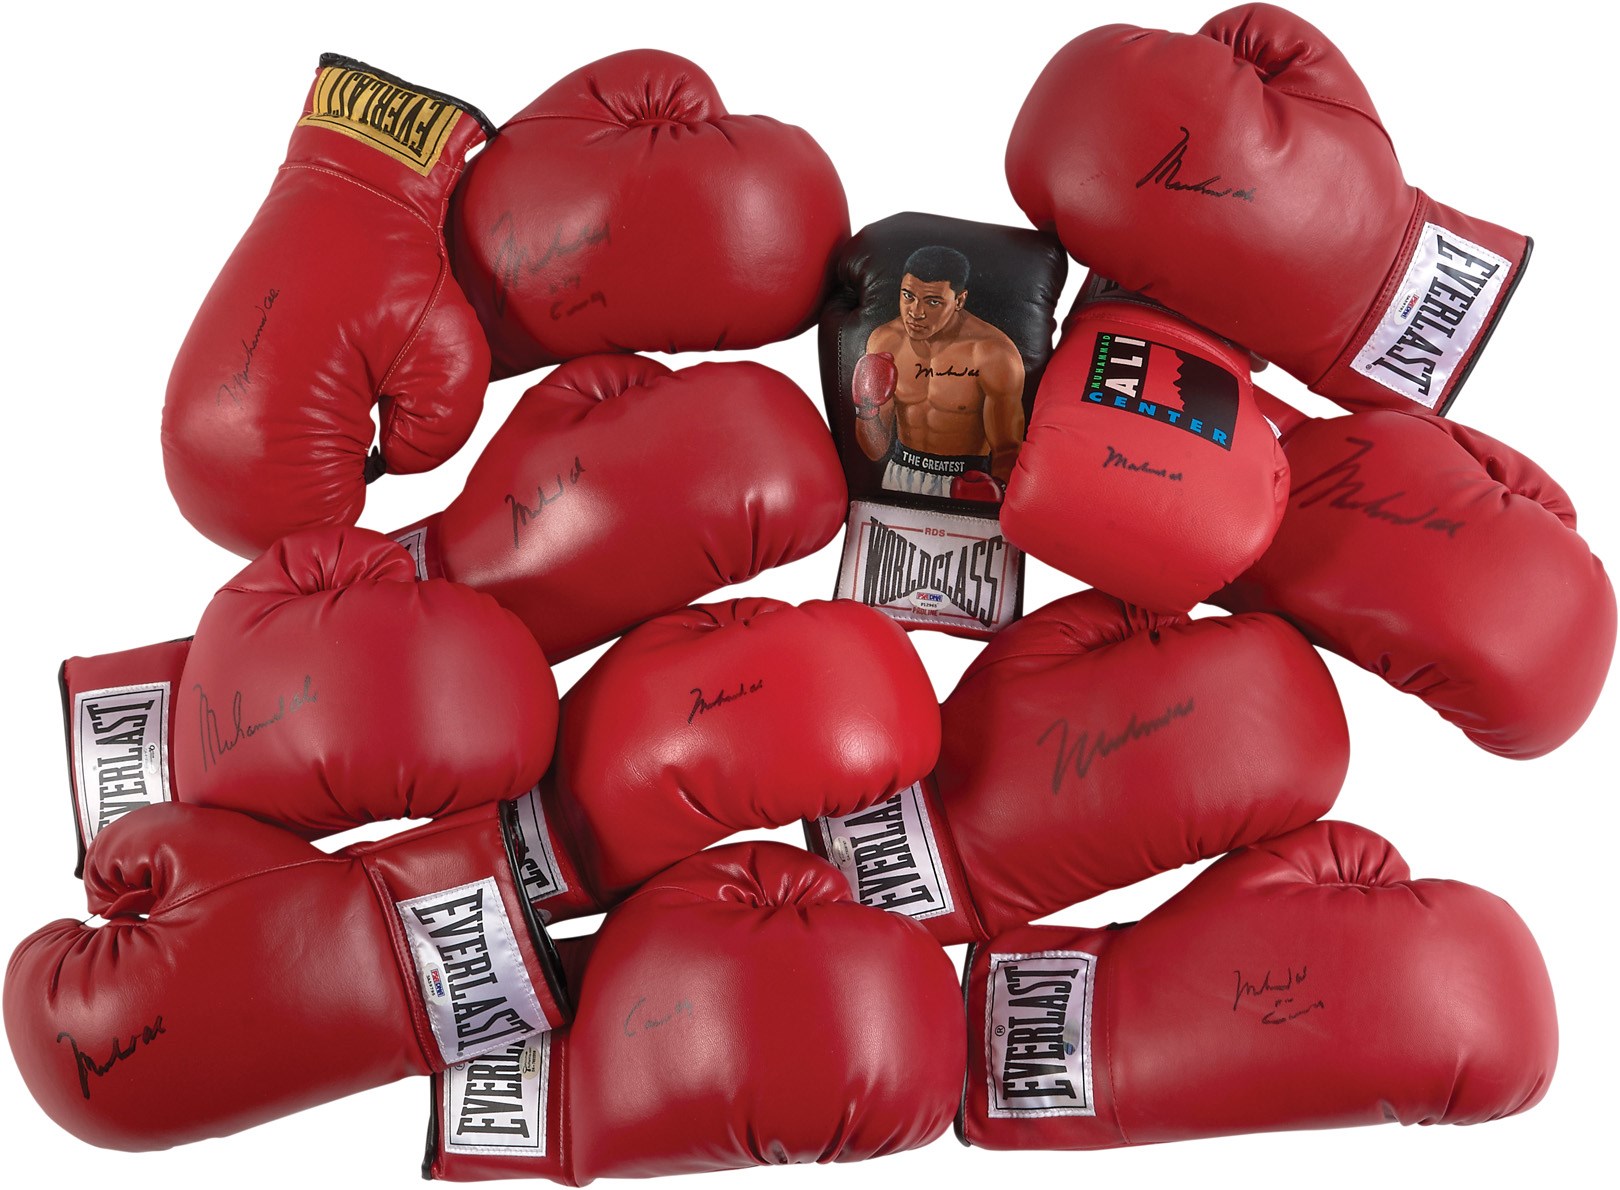 Muhammad Ali & Boxing - Muhammad Ali & Cassius Clay Signed Boxing Glove Collection (13)